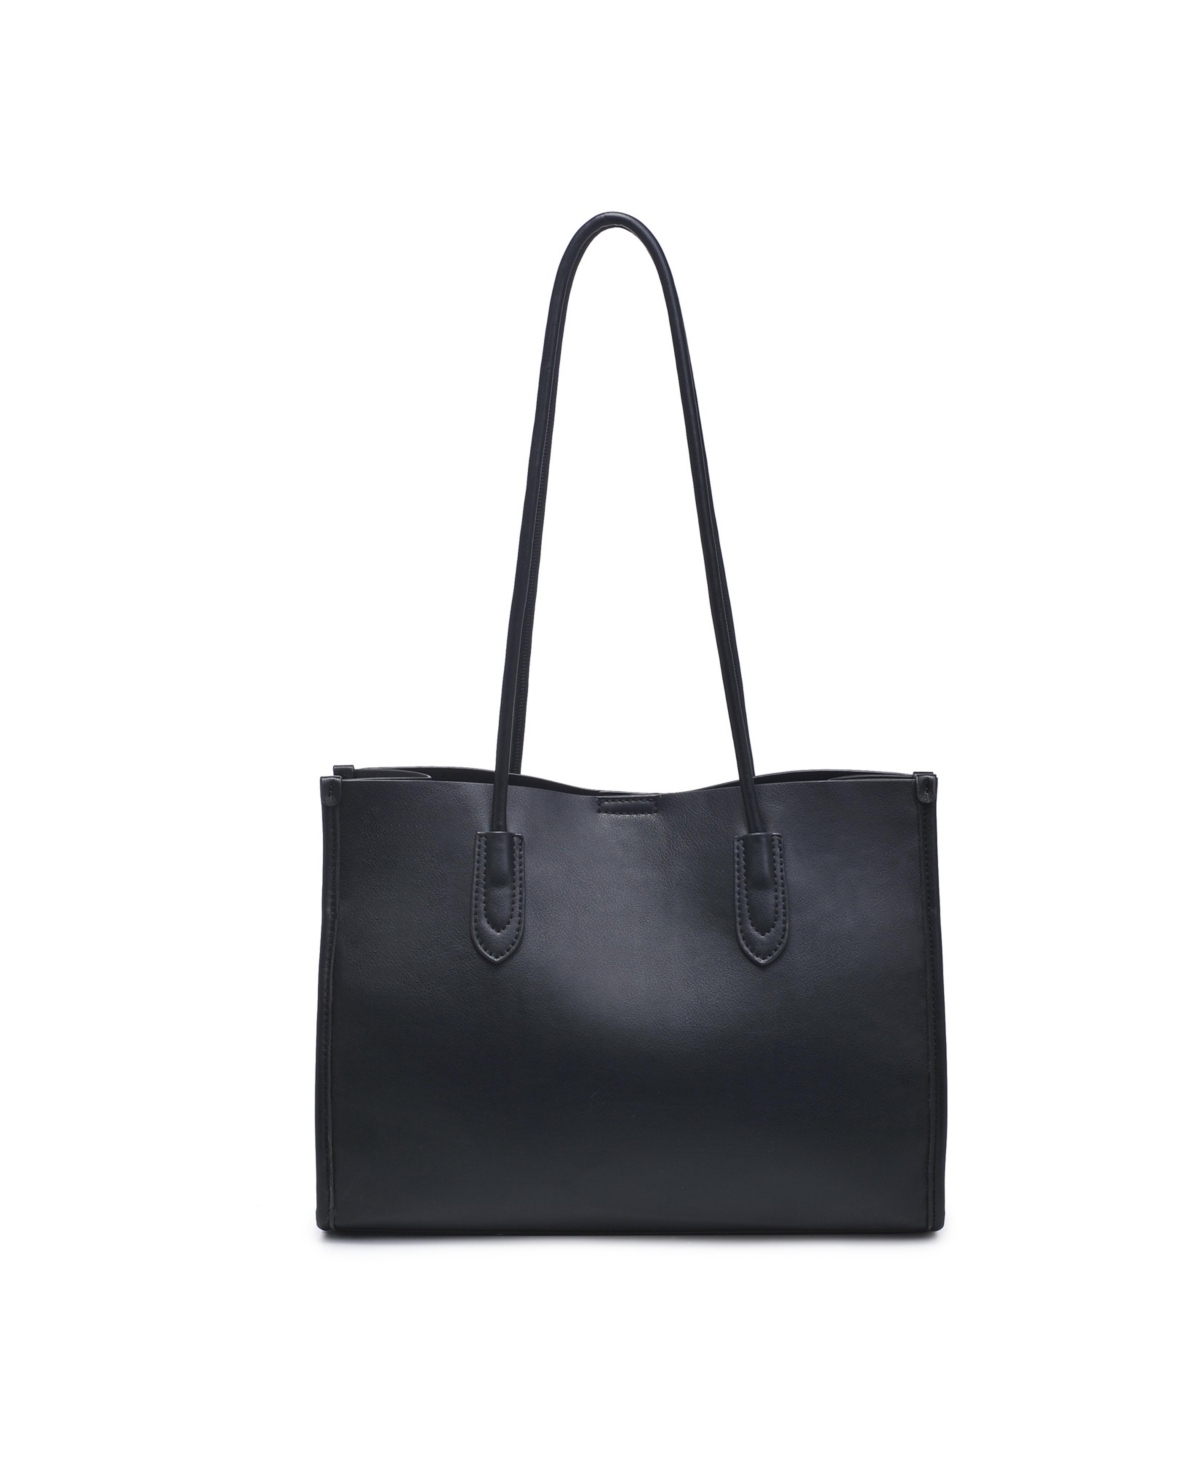 Urban Expressions Sidney Smooth Tote In Black